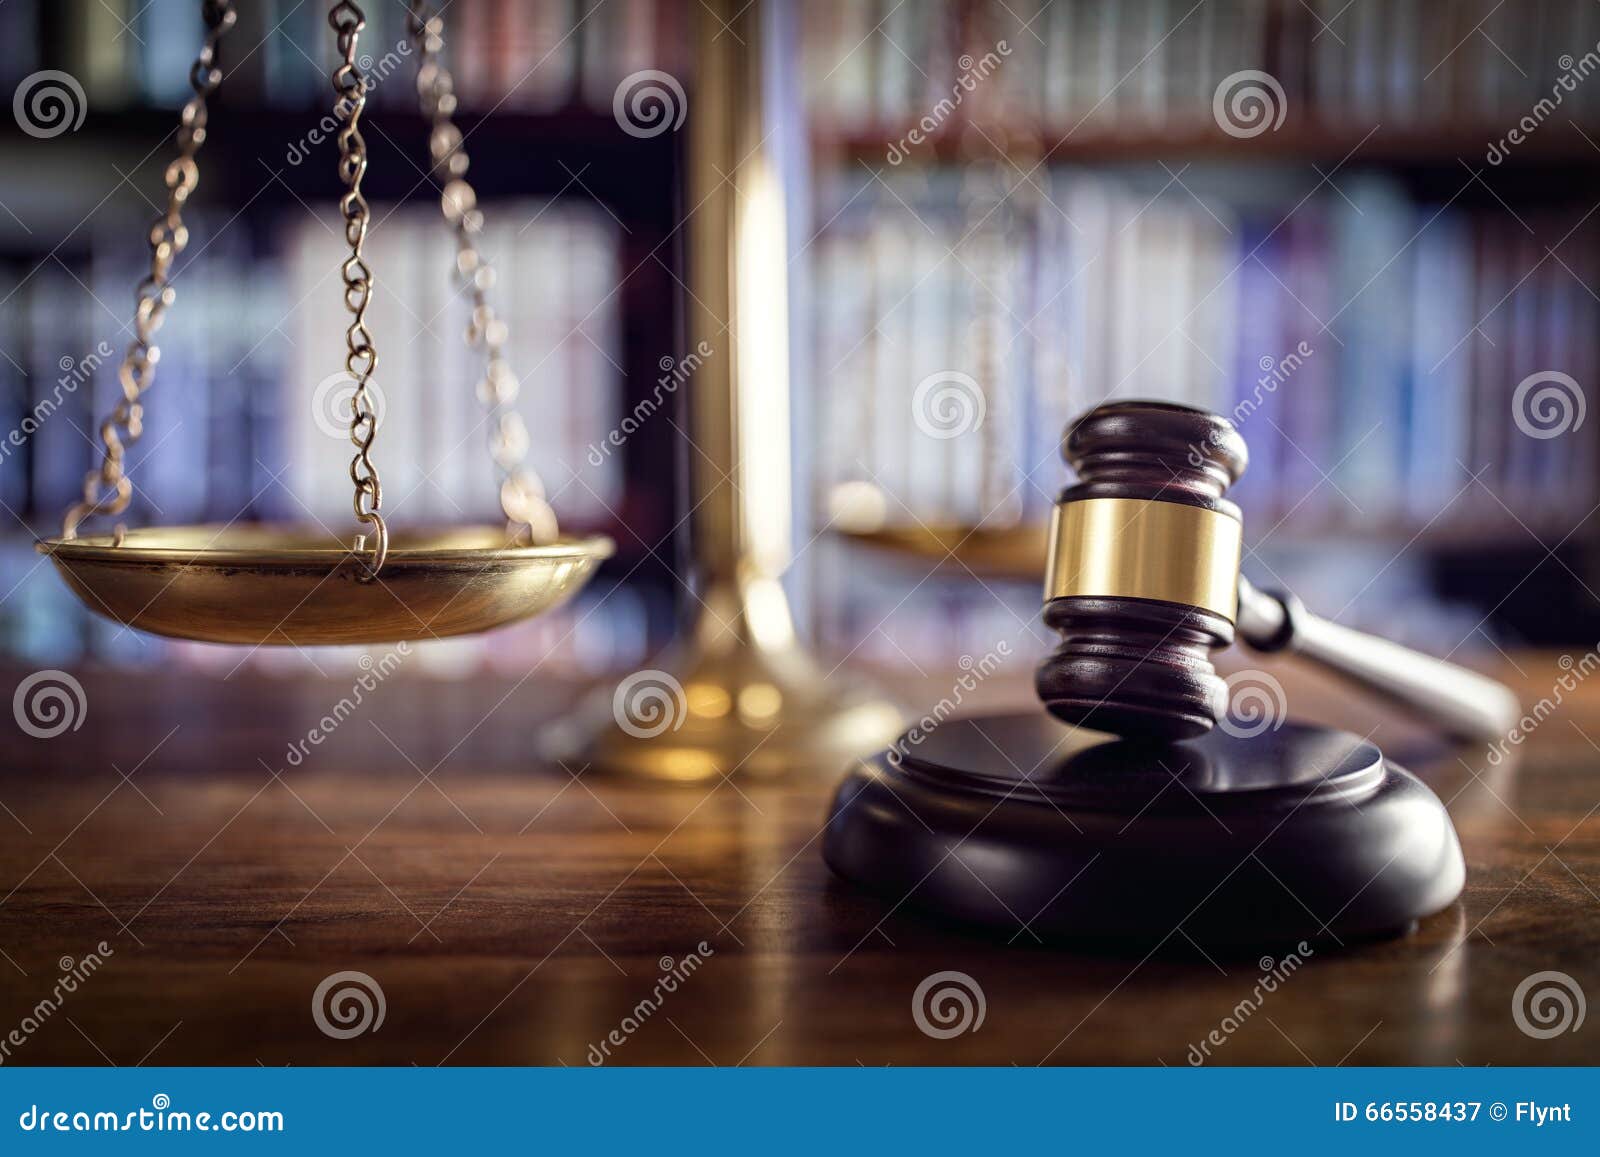 gavel, scales of justice and law books